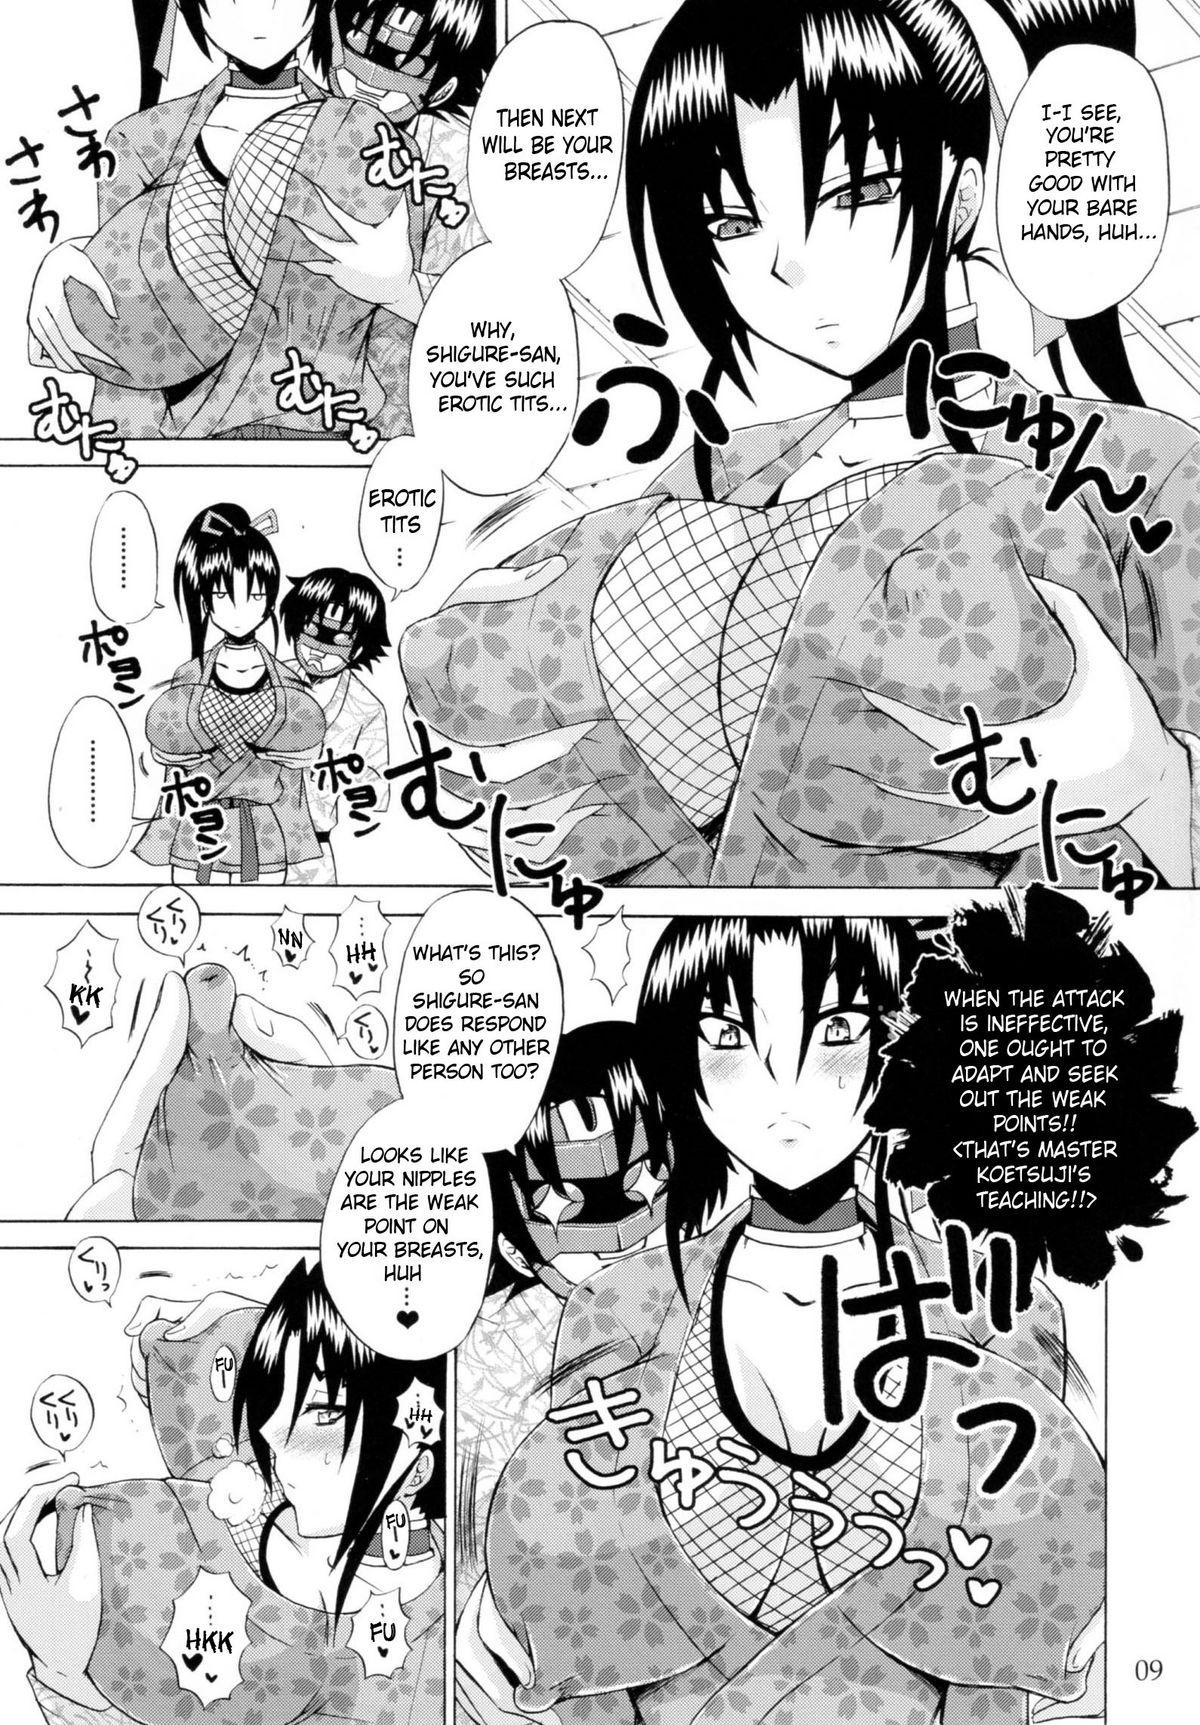 The Mightiest Disciple's Teacher Shigure 5 Page 8 Of 23 historys s...